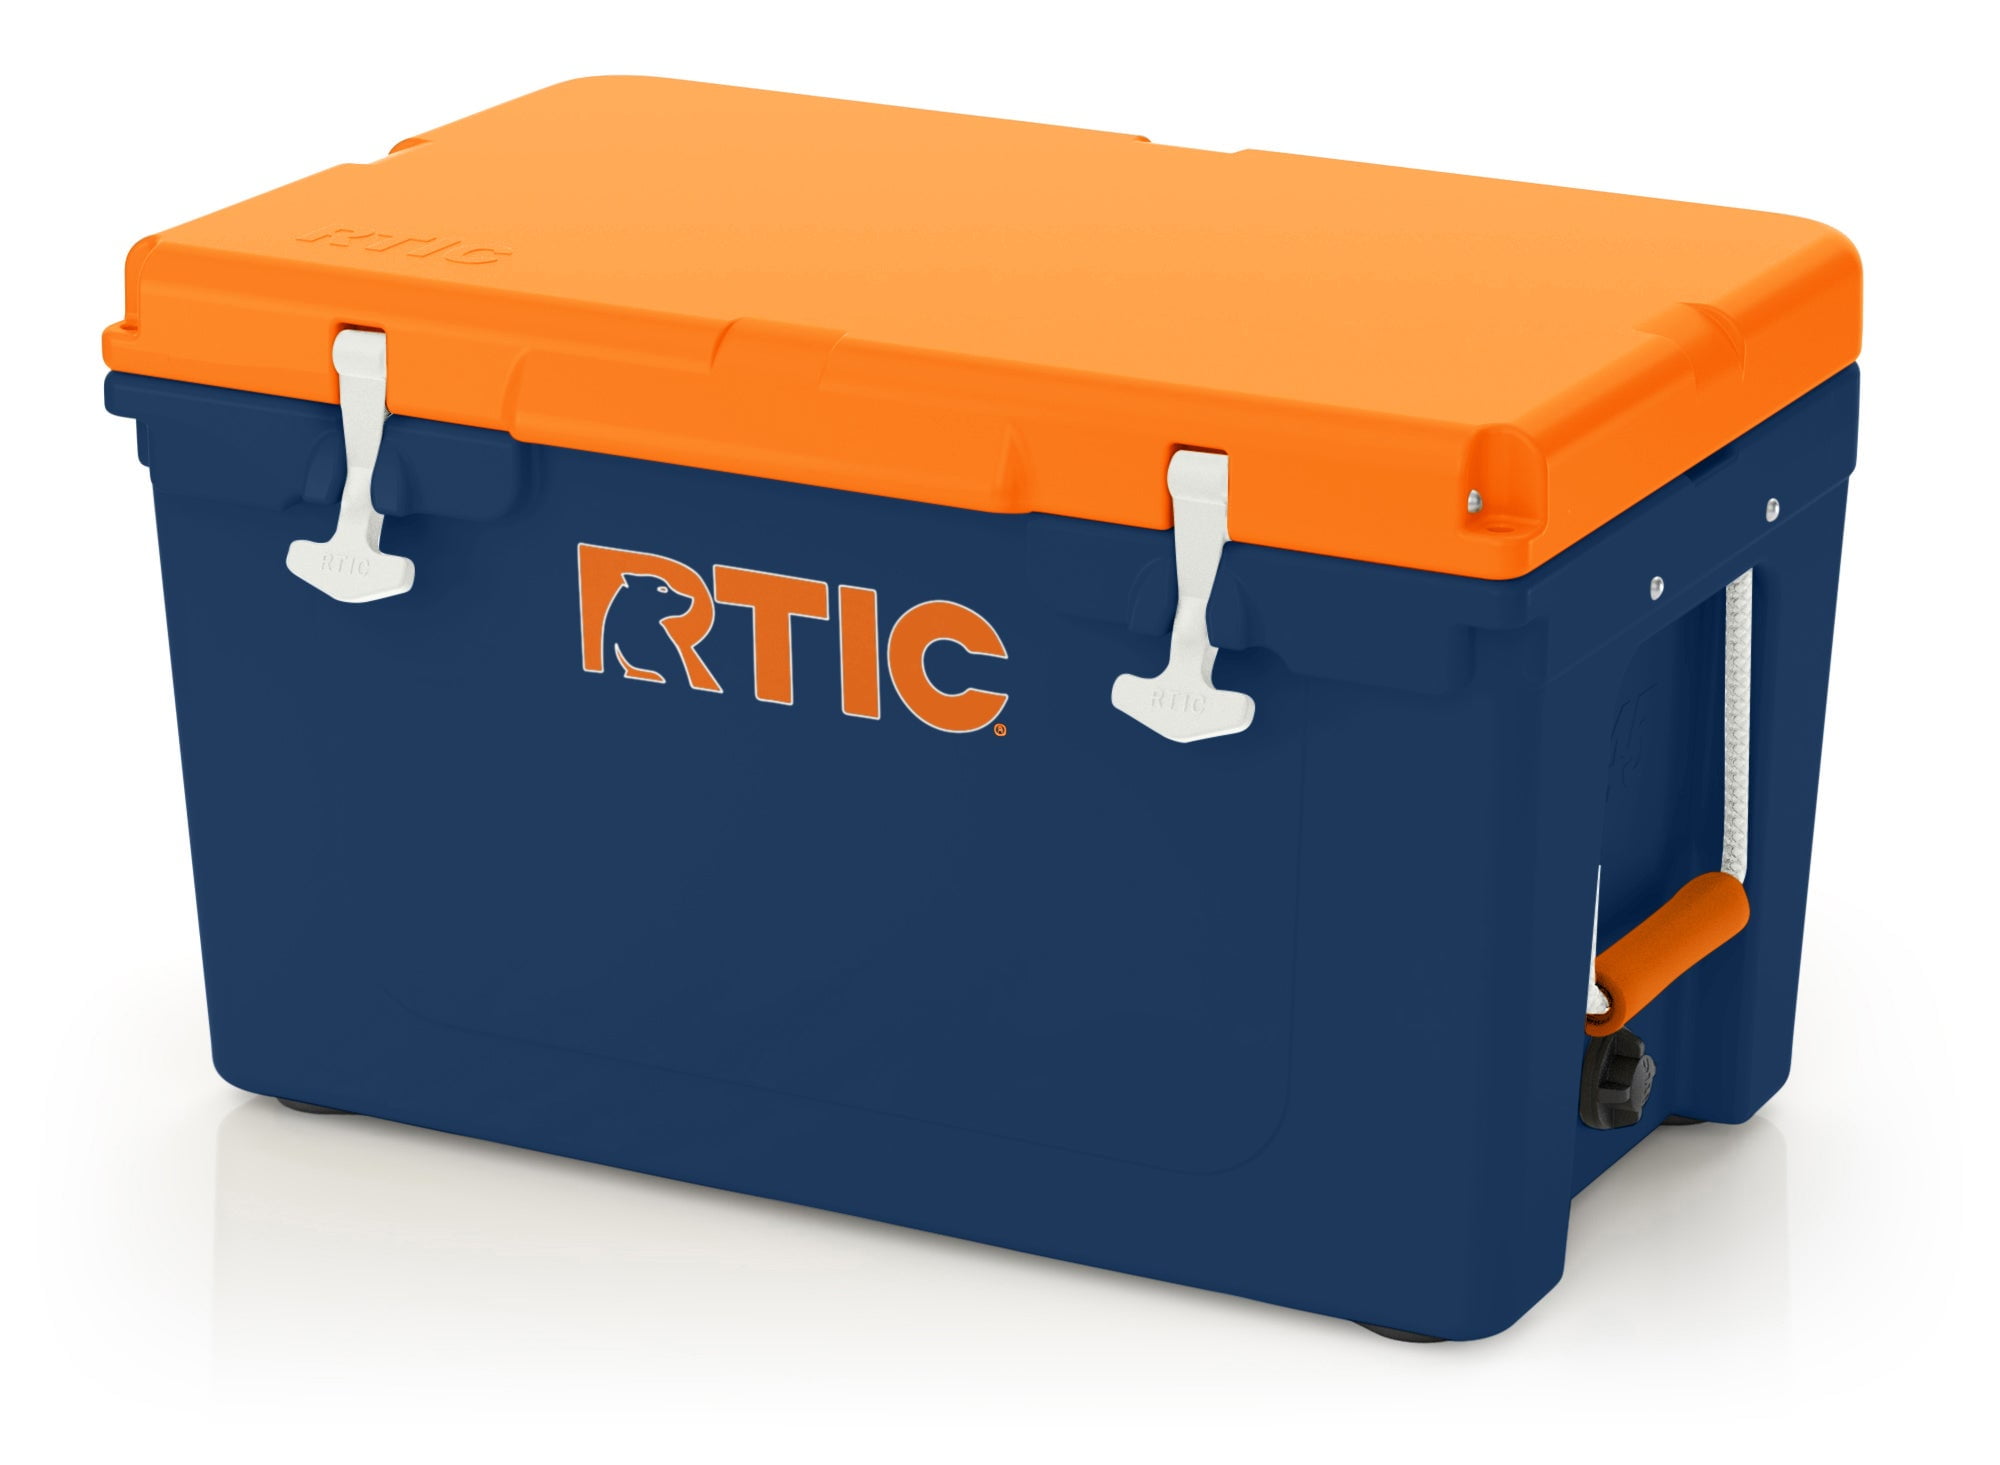  RTIC 45 qt Hard Cooler Insulated Portable Ice Chest Box for  Beach, Drink, Beverage, Camping, Picnic, Fishing, Boat, Barbecue, Lagoon :  Sports & Outdoors